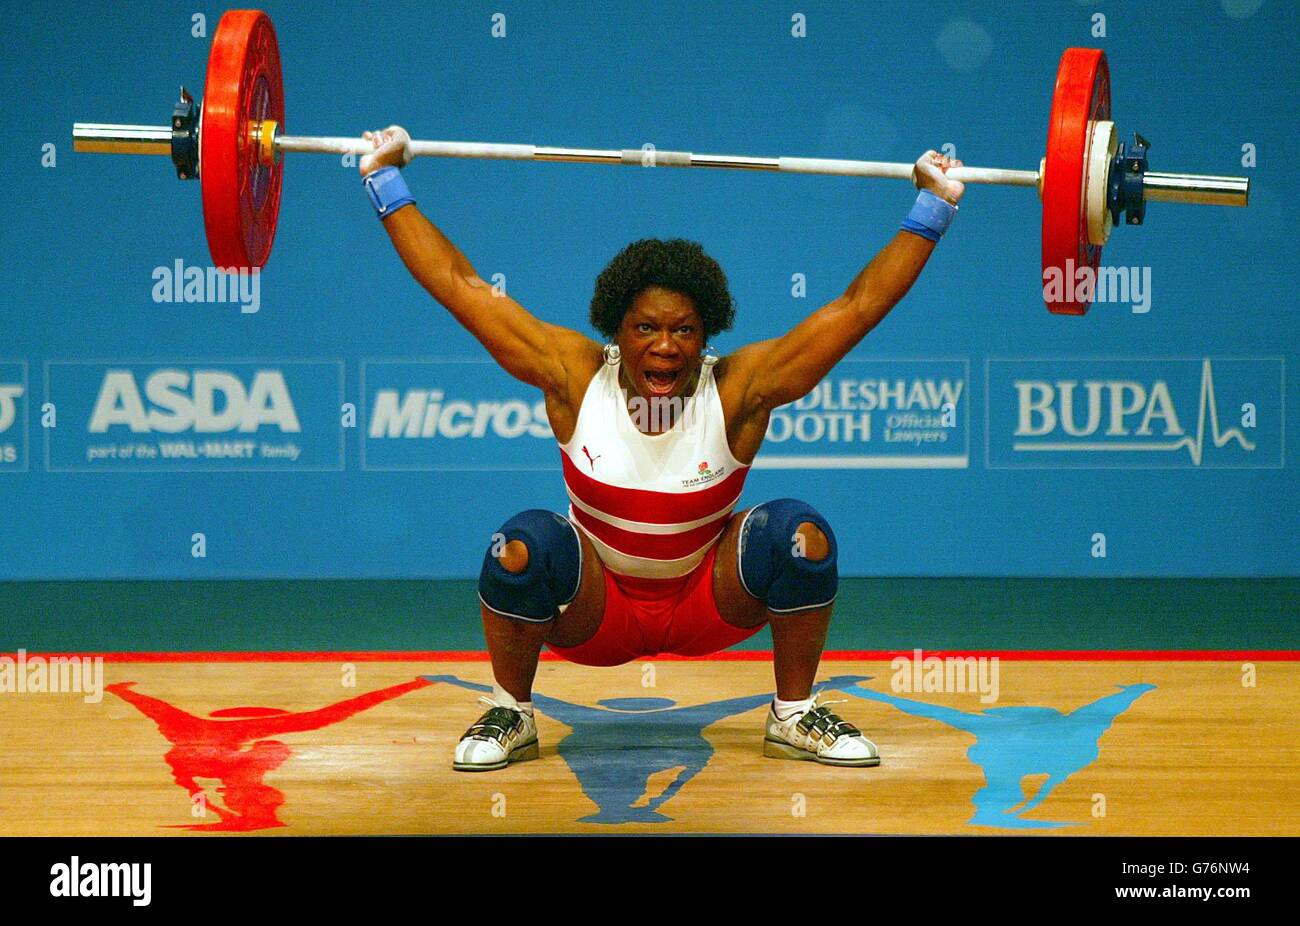 England's Annette Campbell lifts 80kg in the Snatch during the Commonwealth Games Womens 63kg Weightlifting, at the Manchester Arena in Manchester. Stock Photo